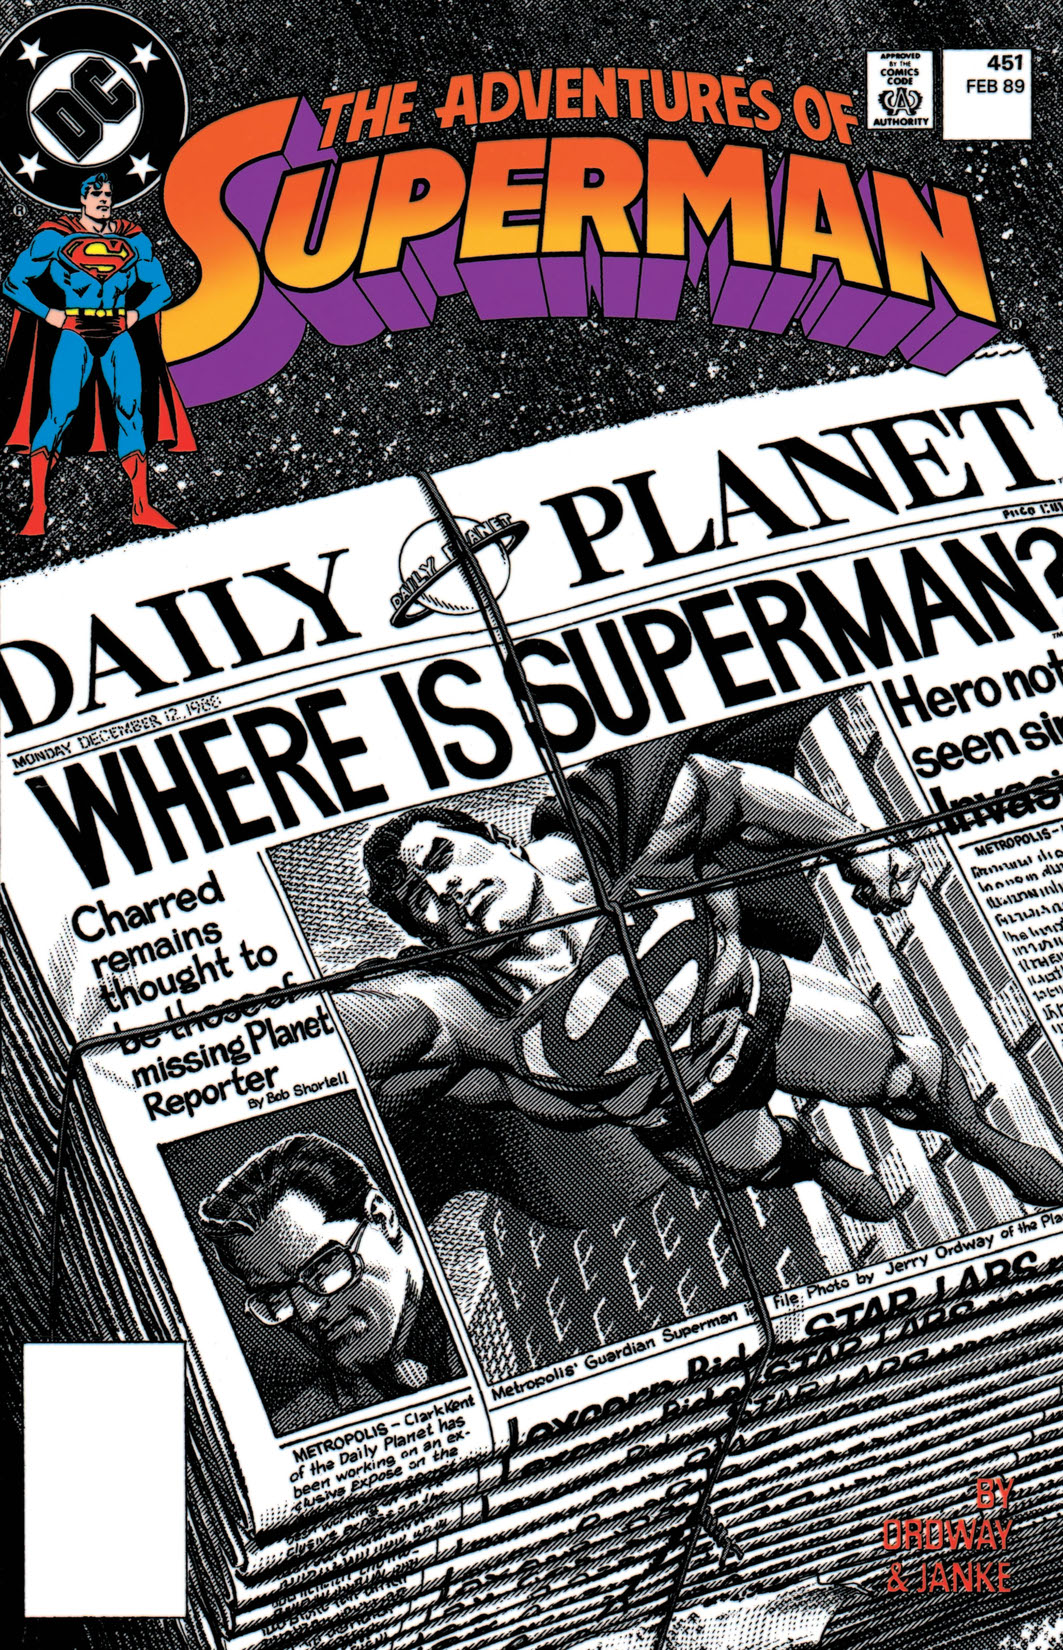 Adventures of Superman (1987-) #451 preview images